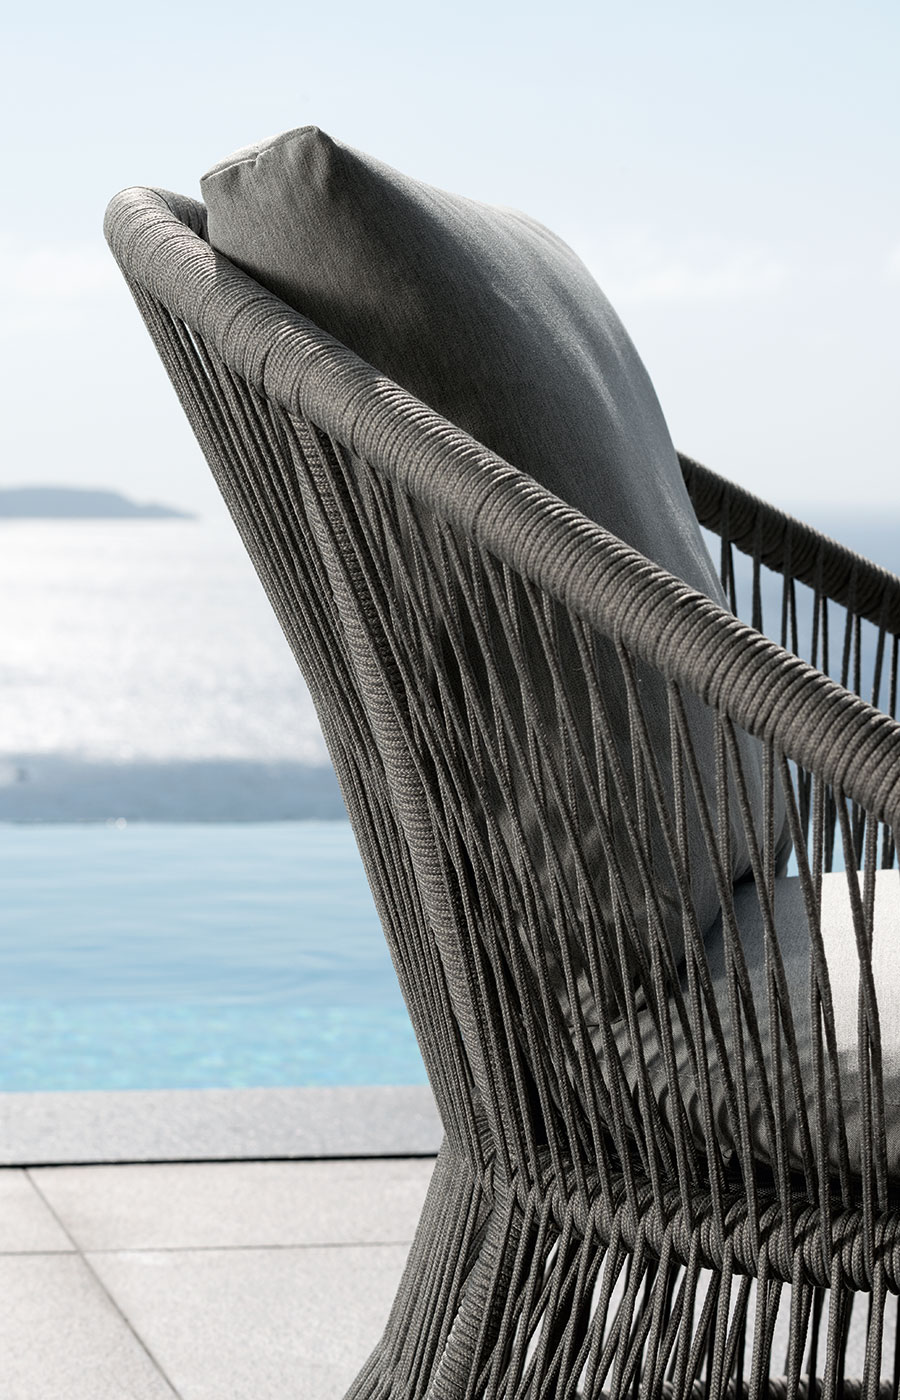 Garden furniture for luxurious villas, hotels, yachts or restaurants. Grey aluminium frame for Rope outdoor armchair. Shop online, free shipping.